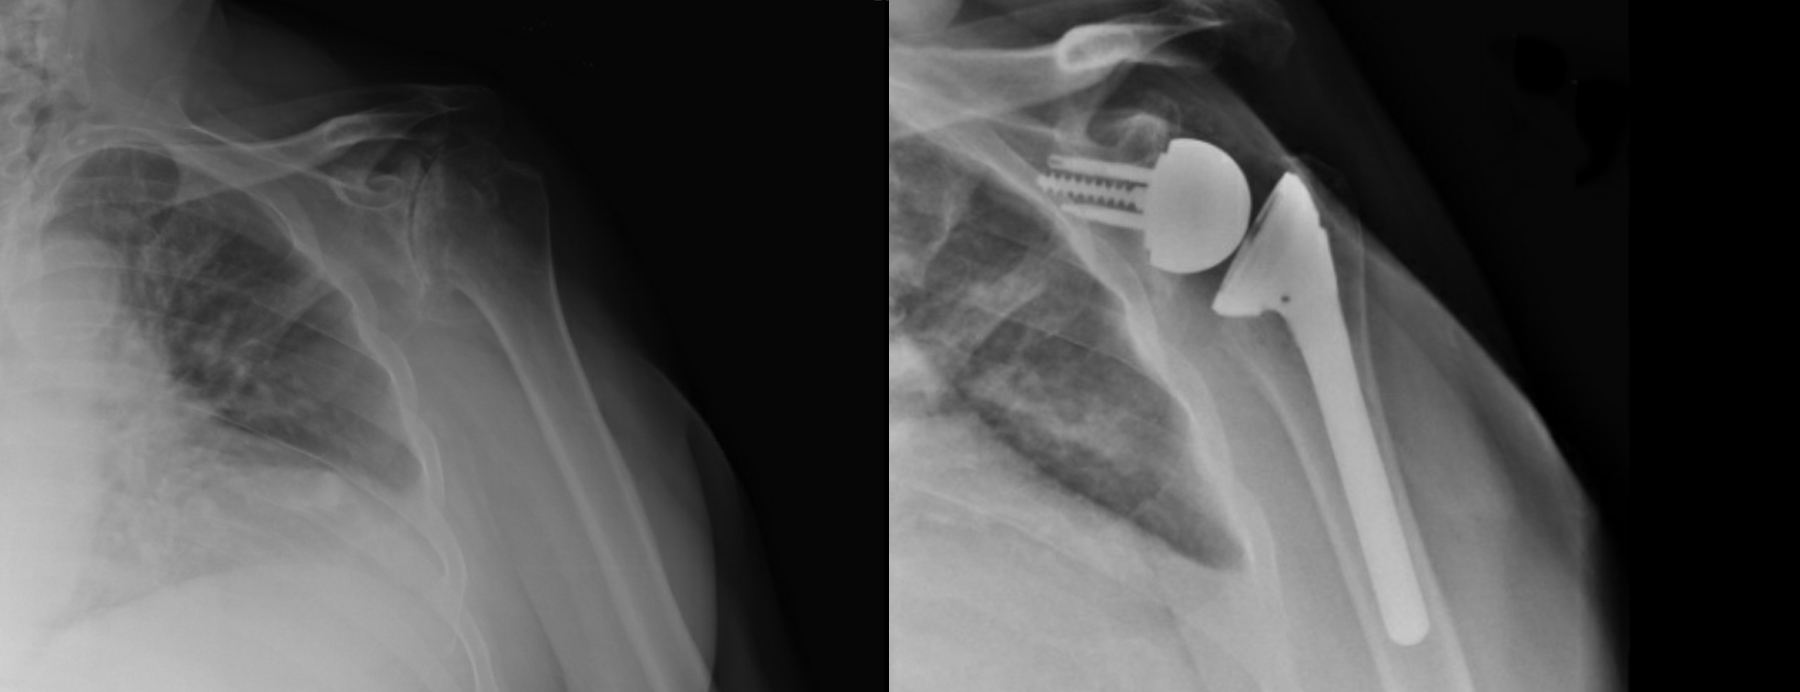 Patient's pre- and postoperative axial radiographs.